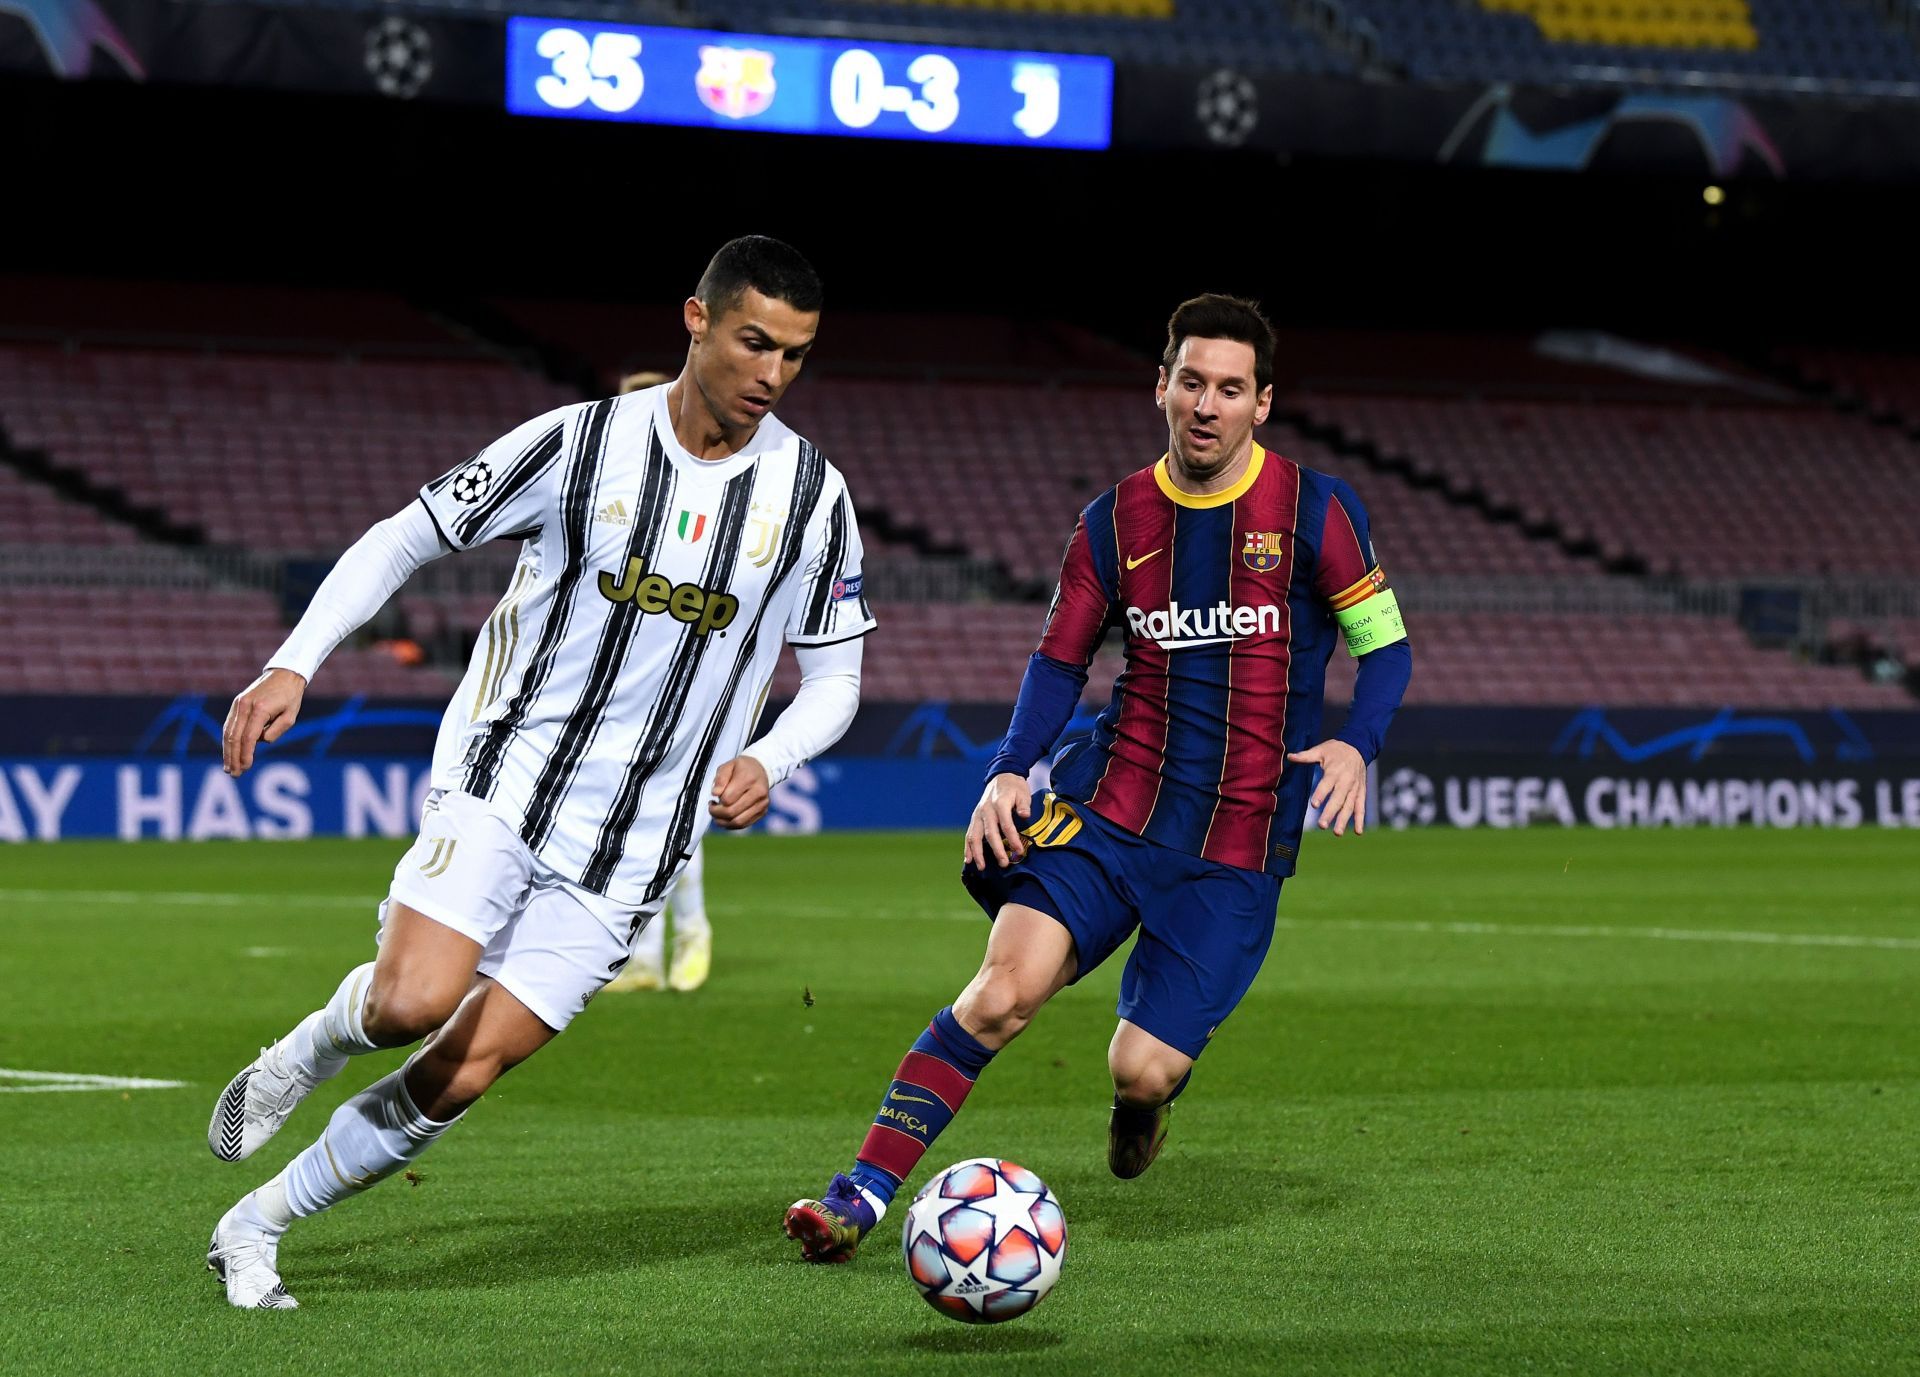 Lionel Messi for Barcelona and Cristiano Ronaldo for Juventus (via Getty Images)